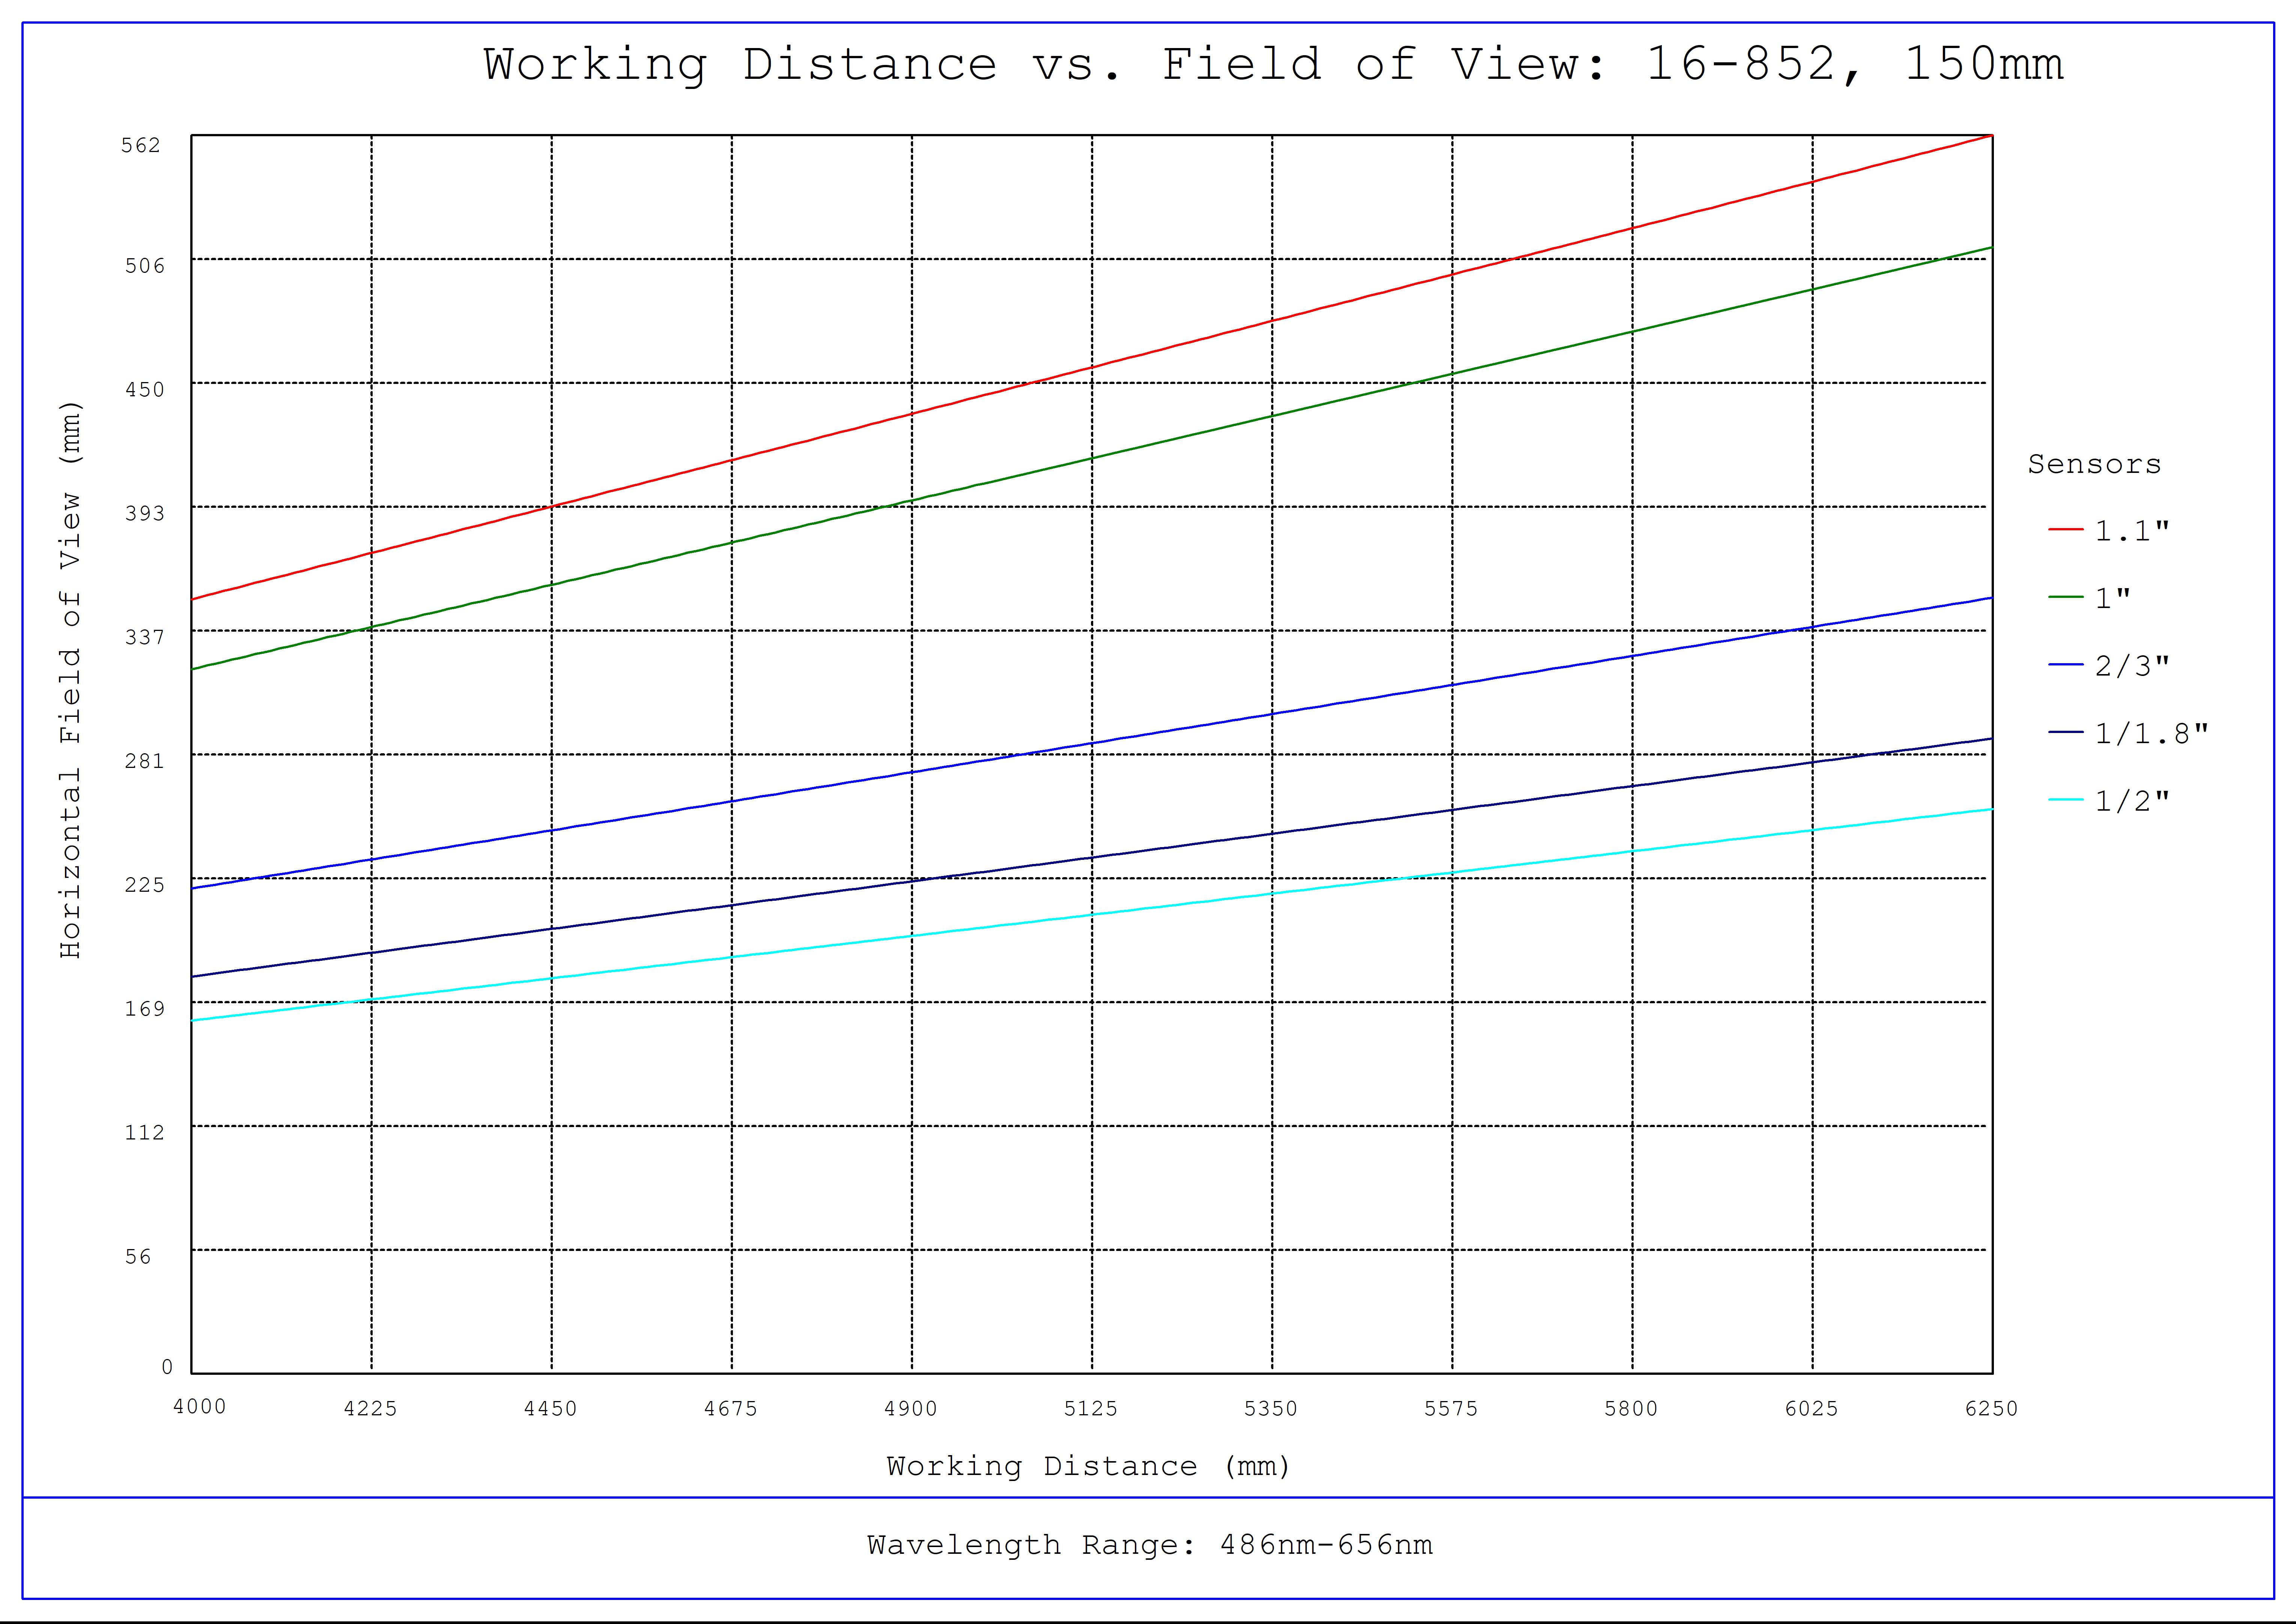 #16-852, 150mm, f/4 Athermal Lens, Working Distance versus Field of View Plot